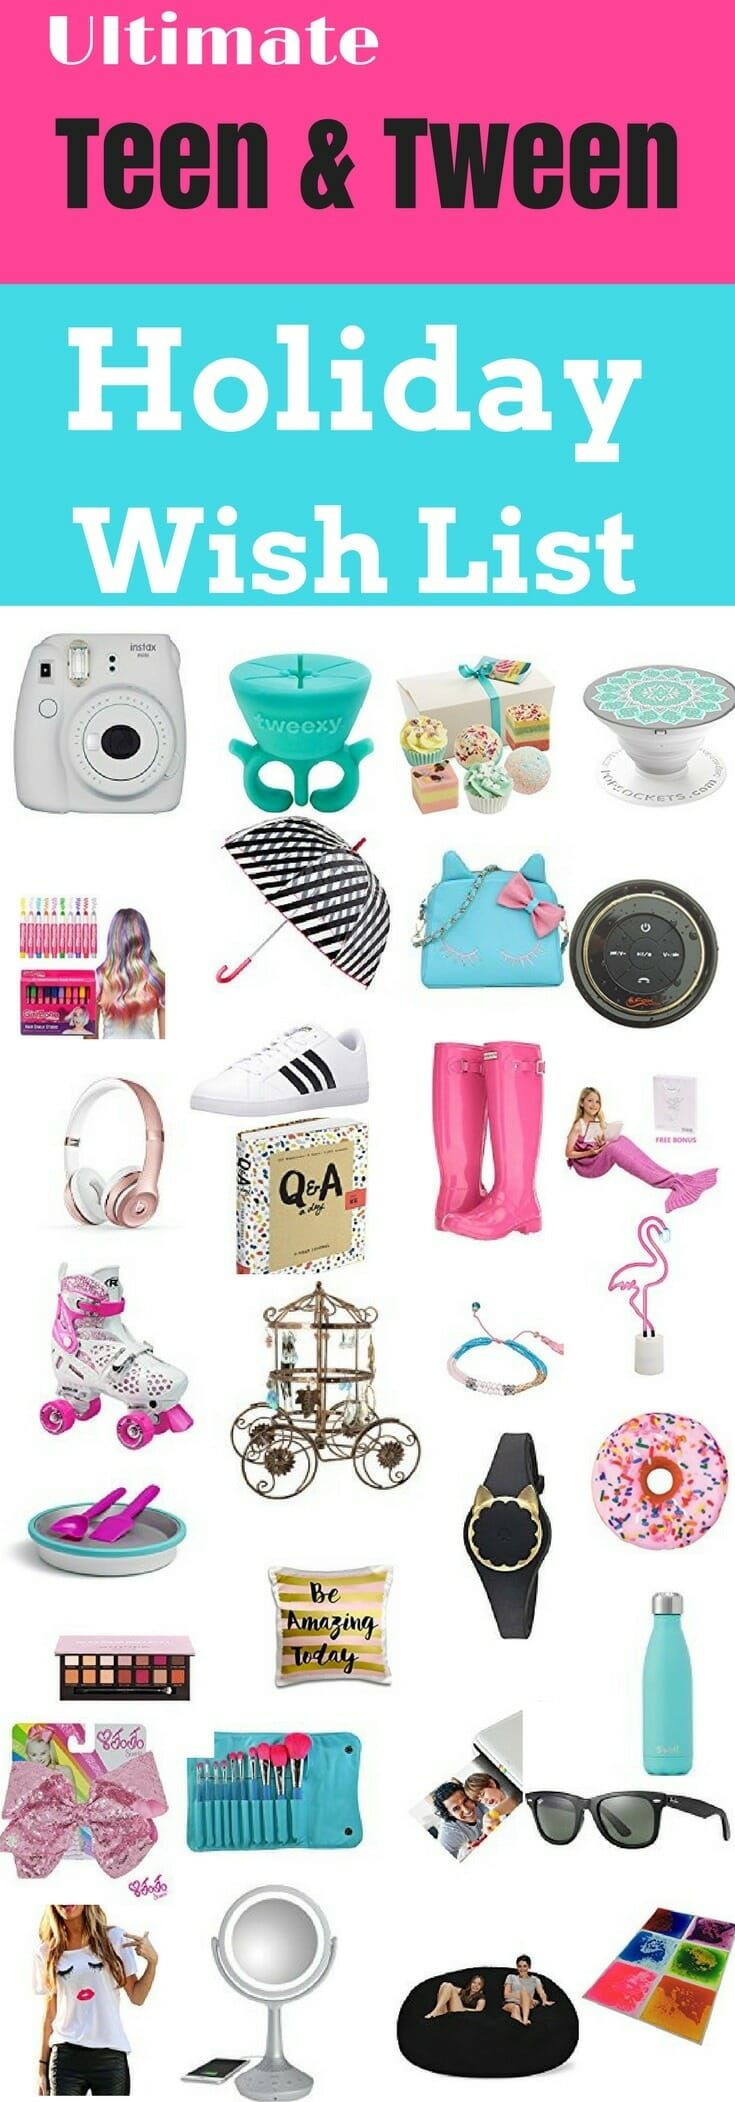 Cool Gift Ideas For Teen Girls
 Gifts for Teenage Girls Under $20 Affordable Christmas